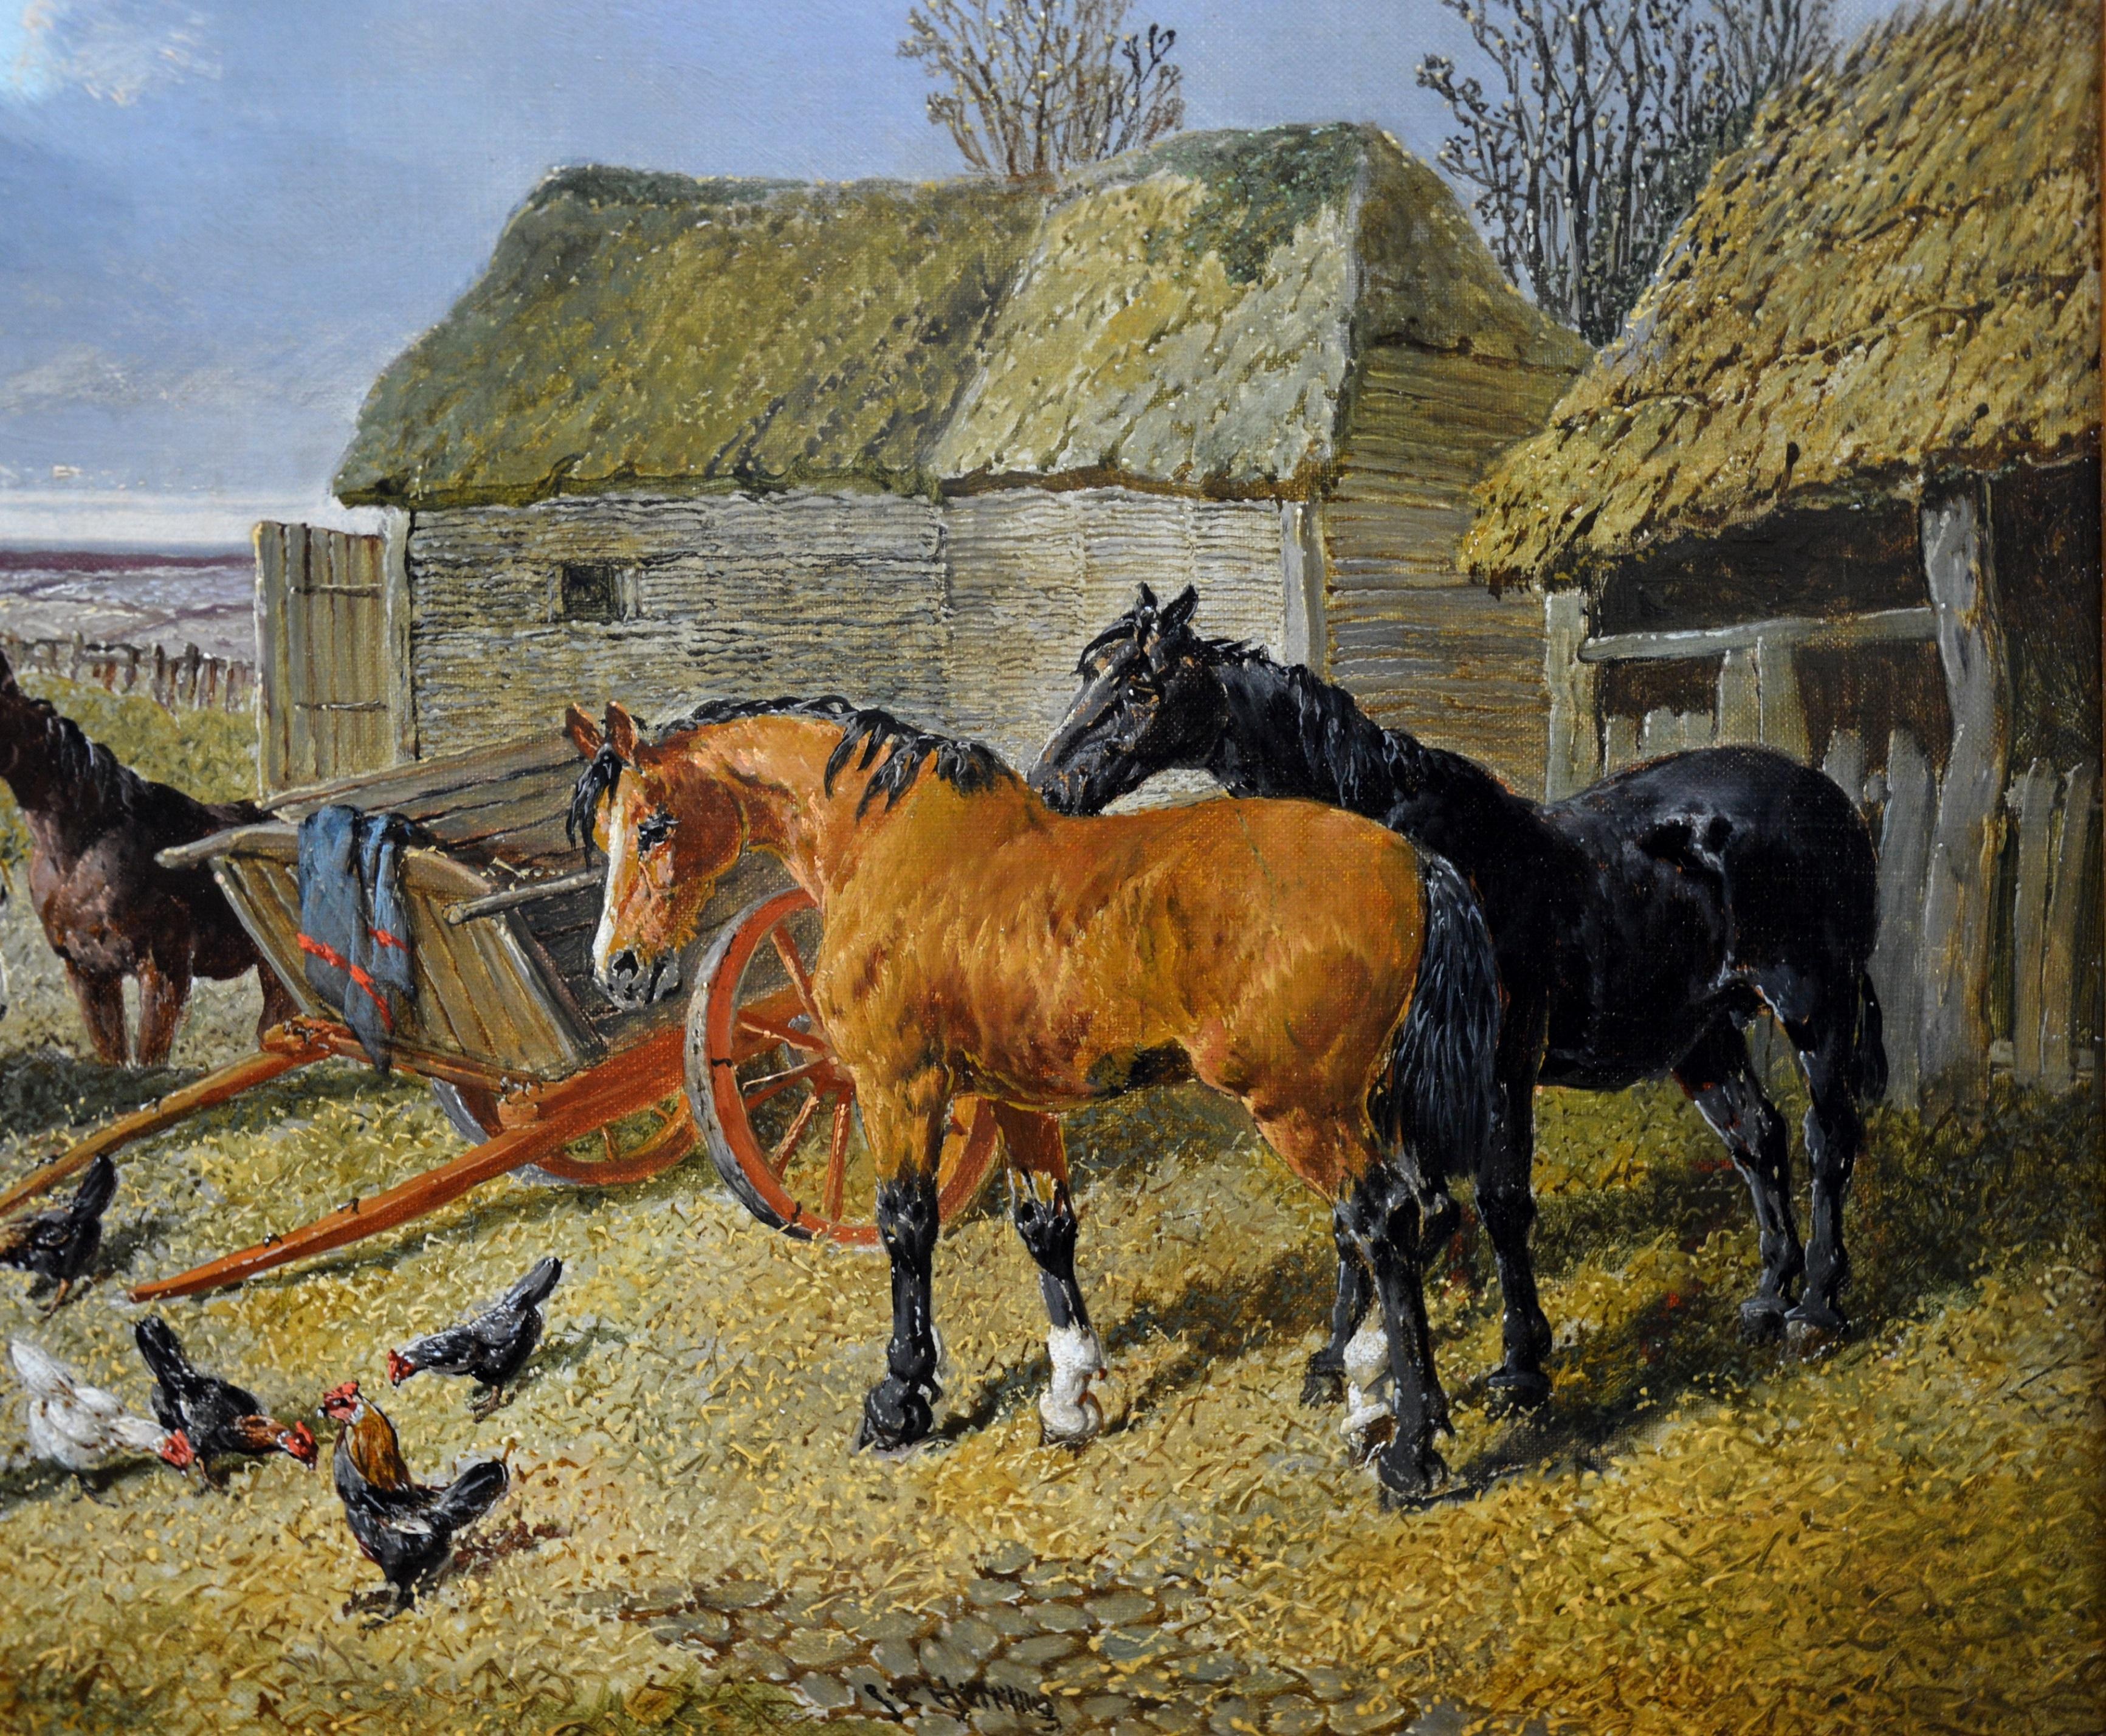 The Farmyard - 19th Century English Landscape Oil Painting - Brown Landscape Painting by John Frederick Herring Jr.